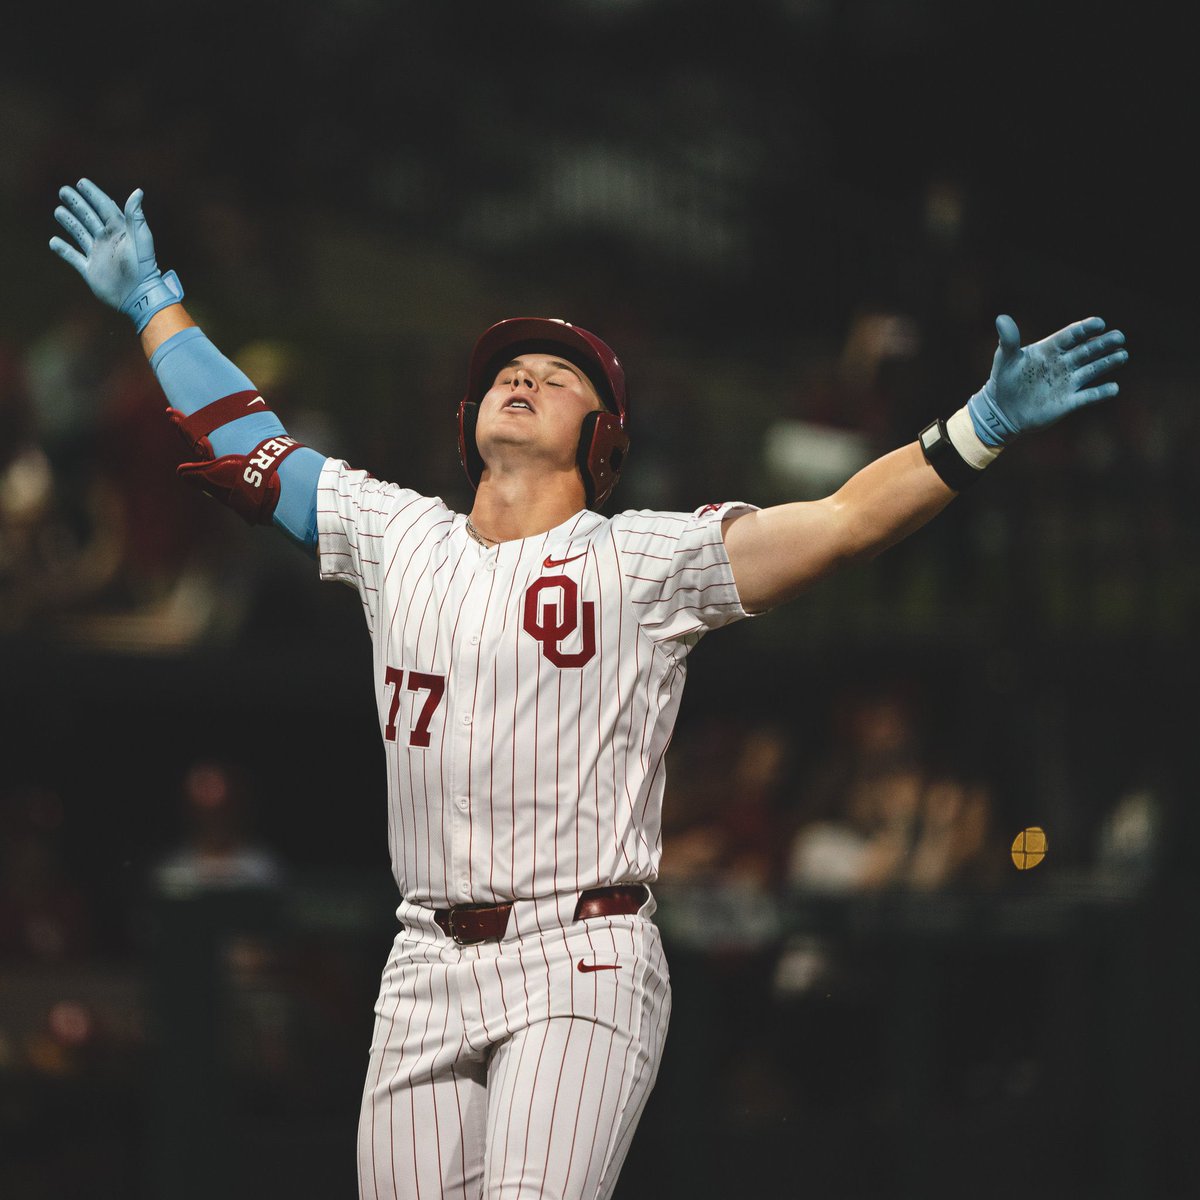 Oklahoma plays for at least a share of the B12 regular season title & their 6th B12 series sweep at 8p at Mitchell Park. Blake Brewster joins me for the @ESPNPlus broadcast.